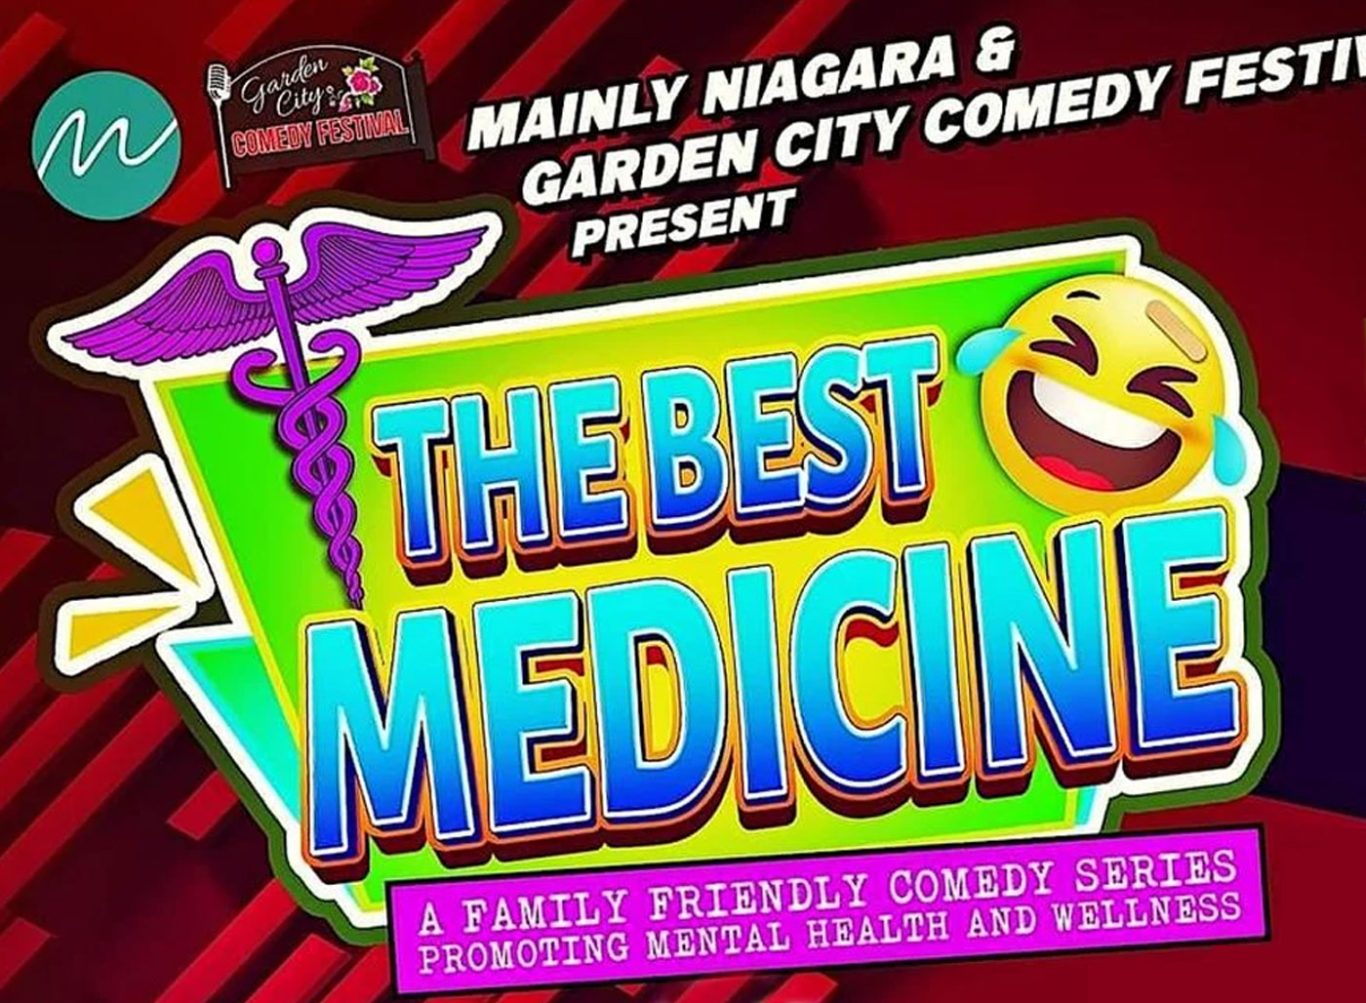 The Best Medicine comedy poster